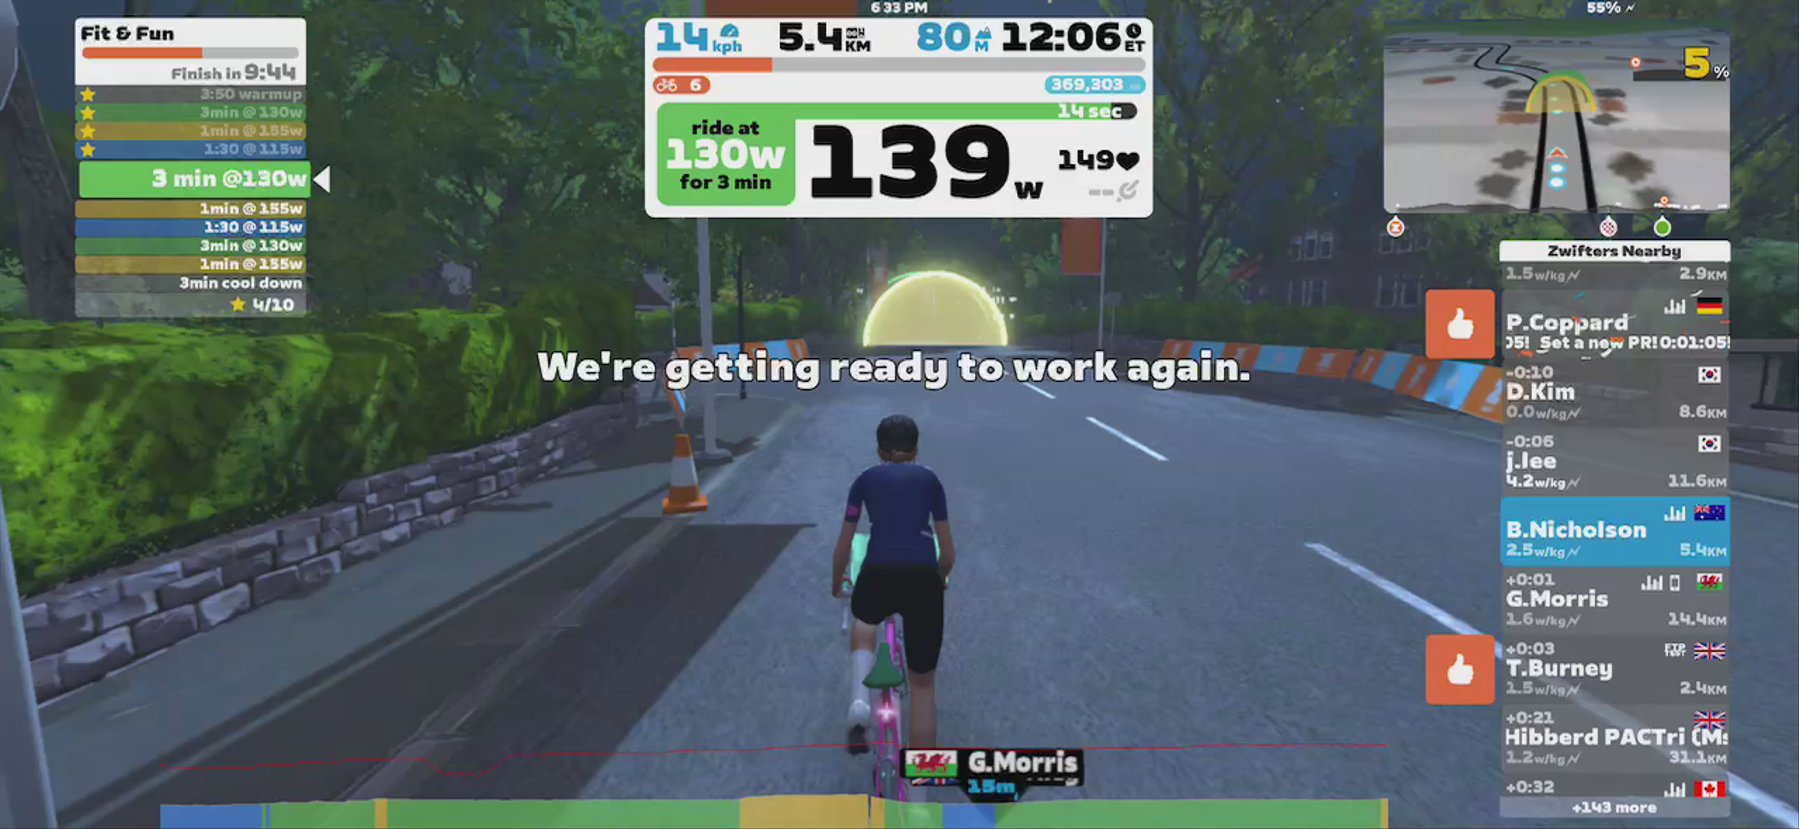 Zwift - Fit & Fun in Yorkshire